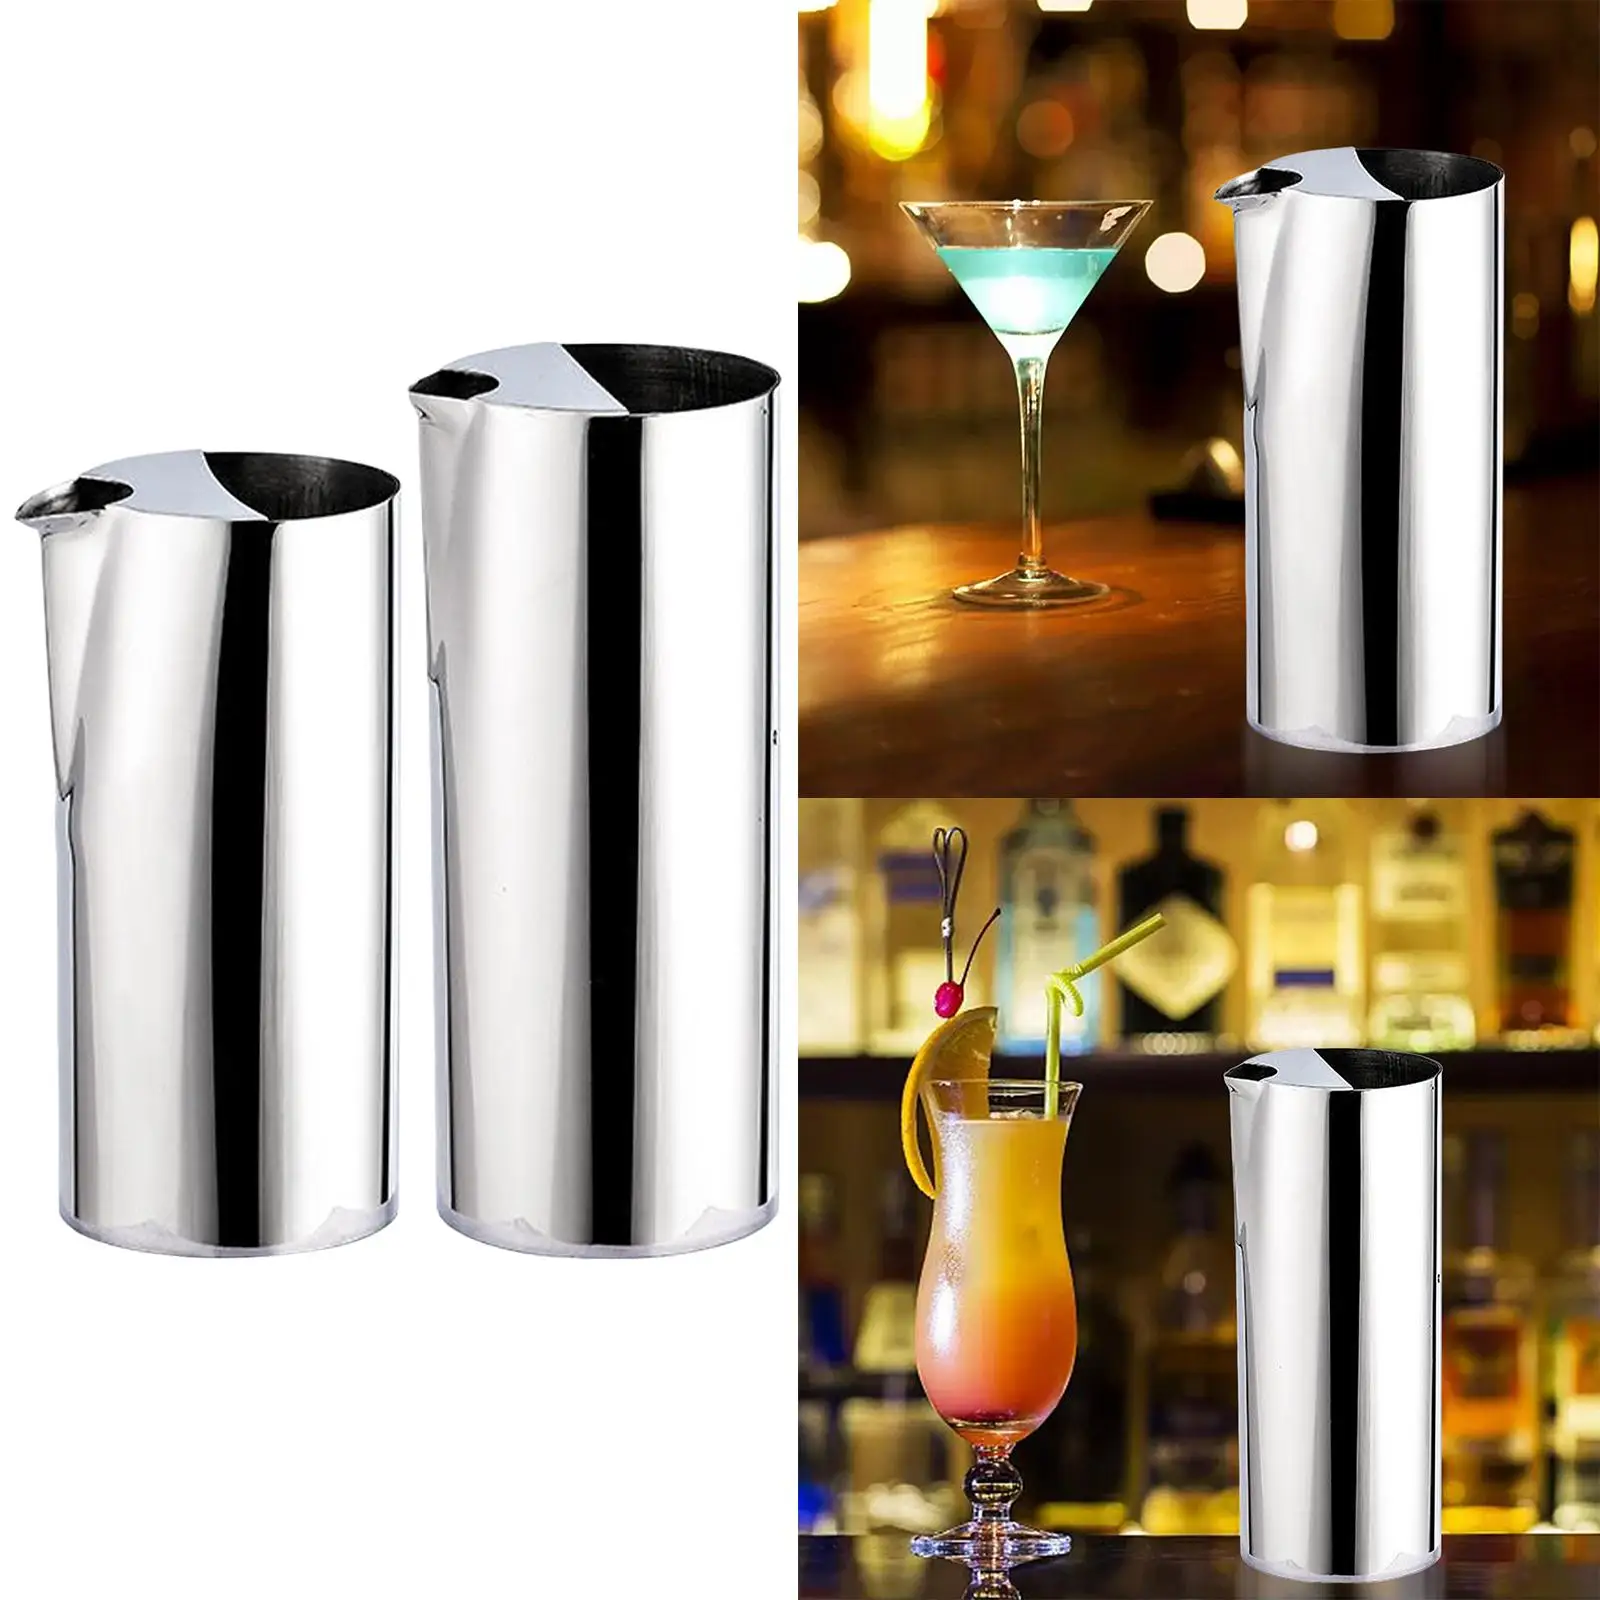 Large Capacity Wine Dispenser Wine Jug Kettle Cocktail Pot Cold Drinking Pitcher Water Pitcher Carafe for Home Hotel Bar Party